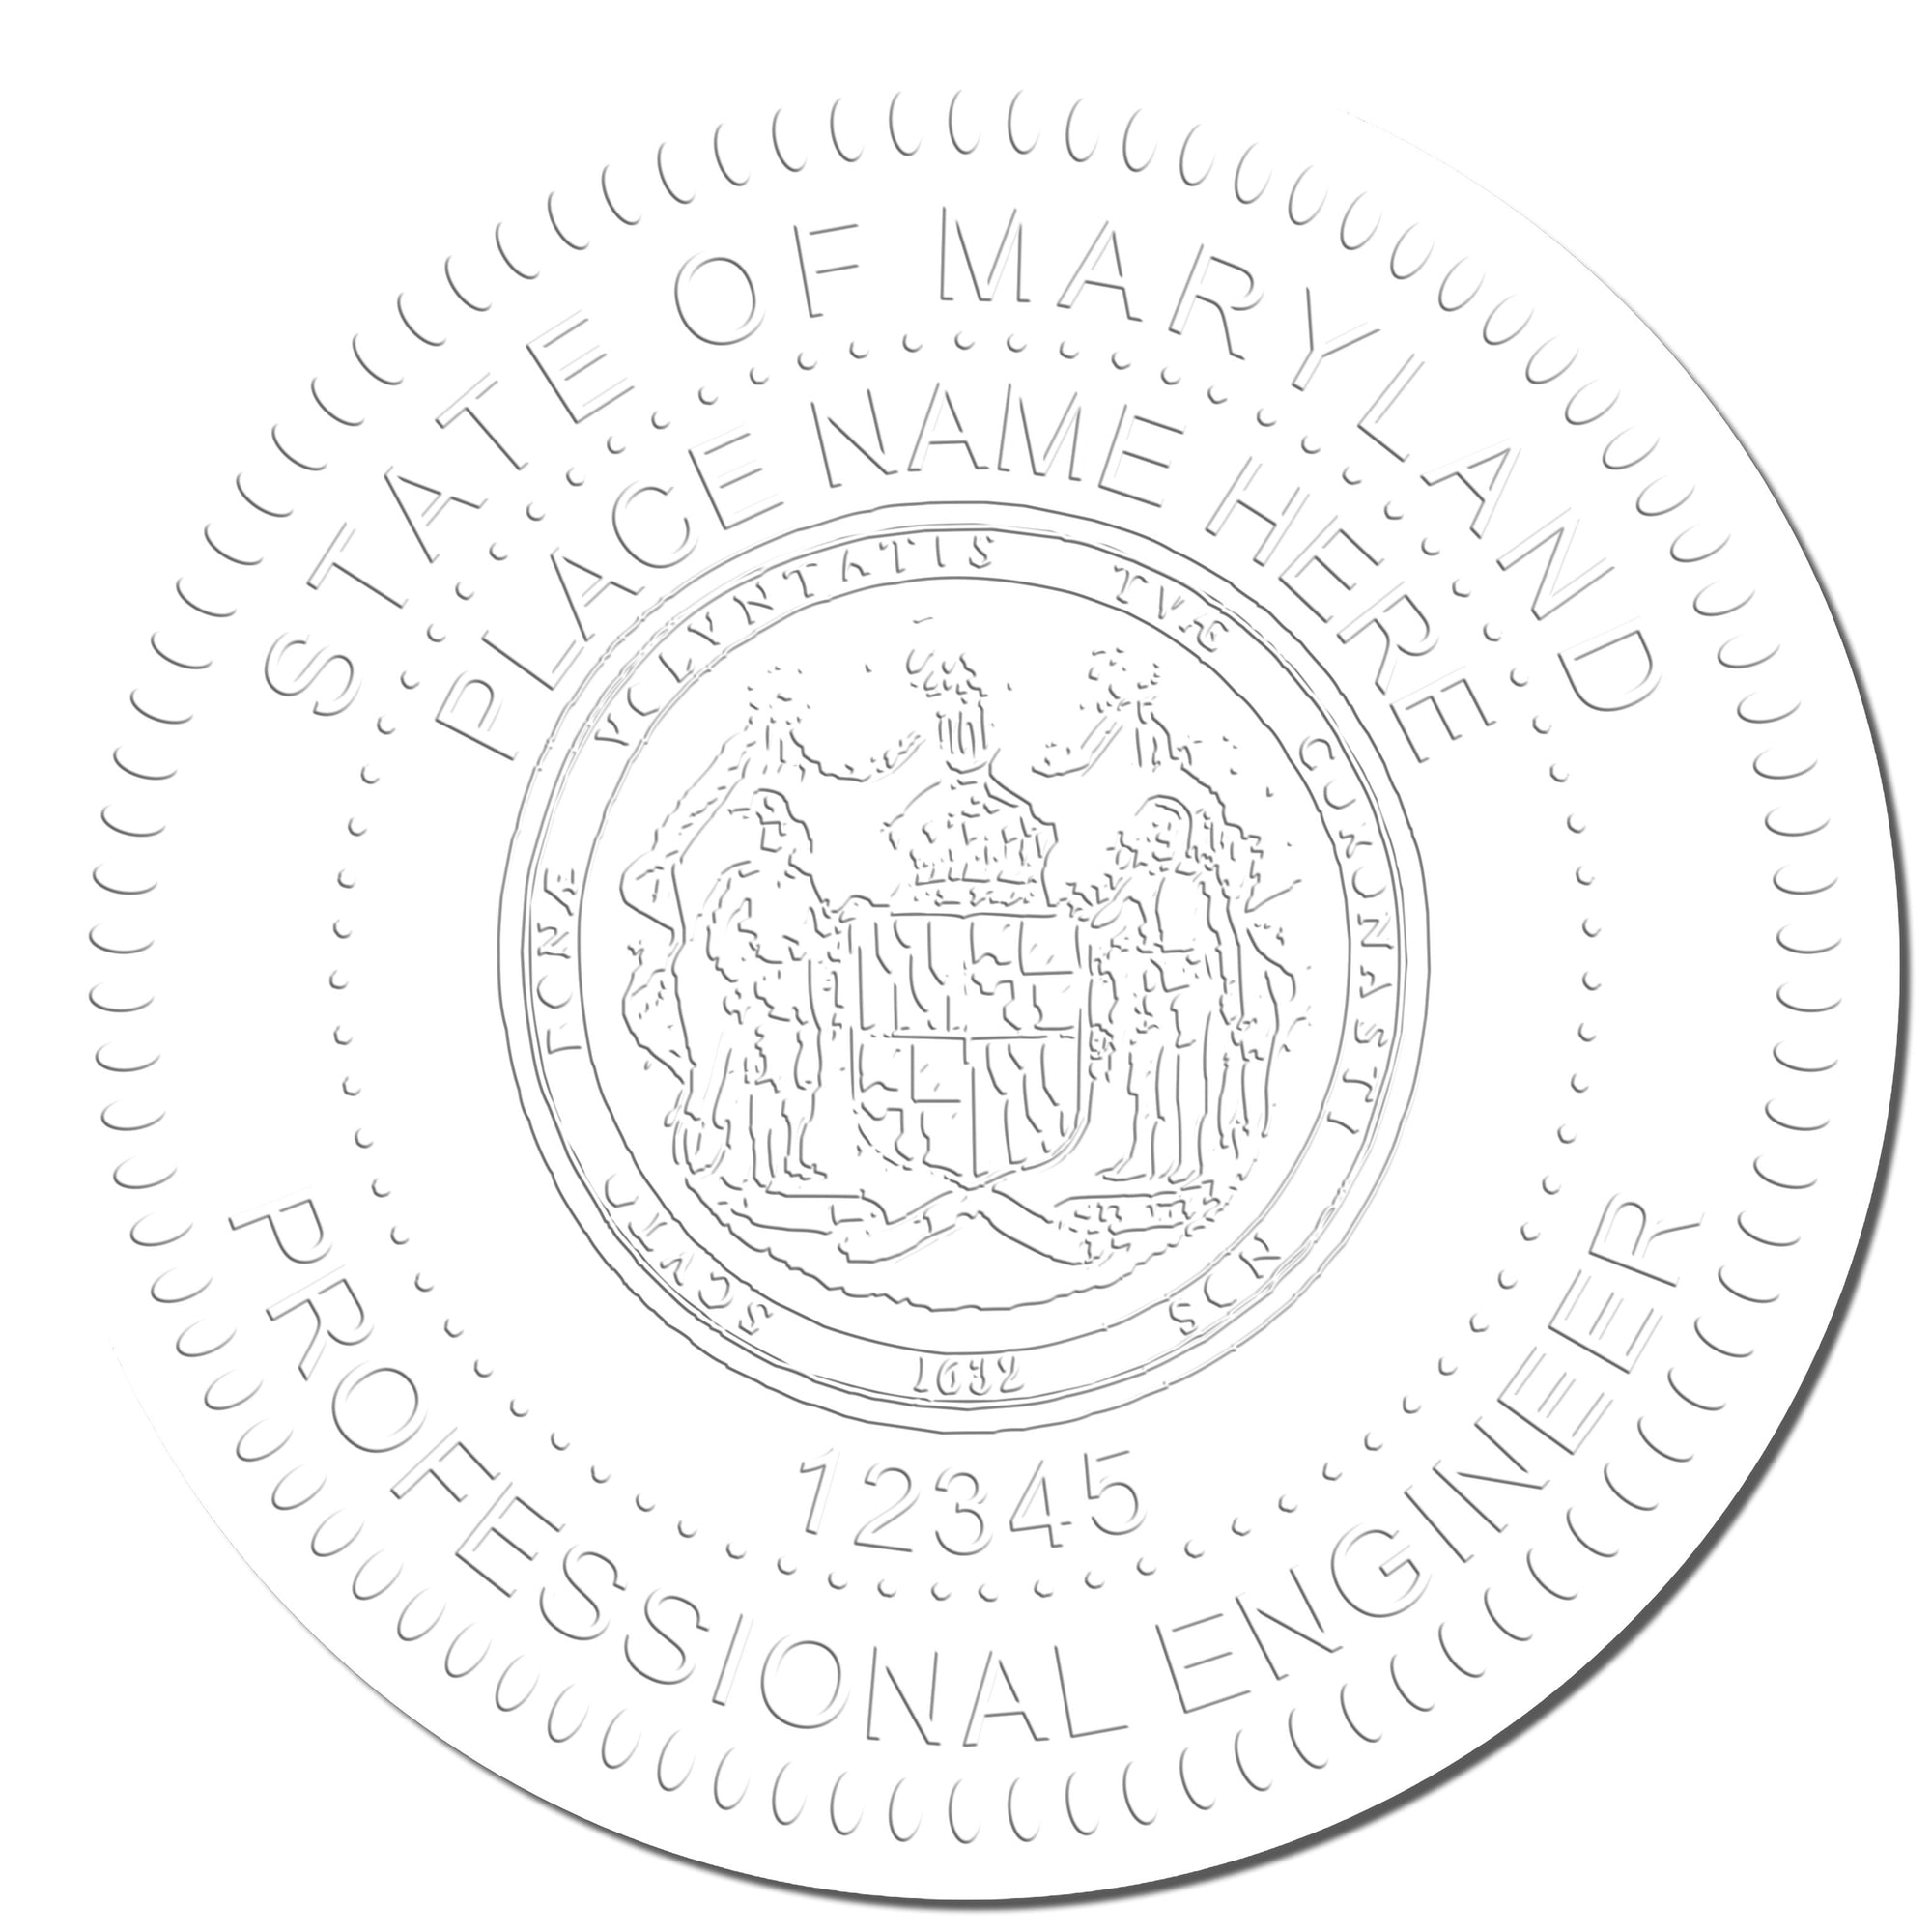 The main image for the Maryland Engineer Desk Seal depicting a sample of the imprint and electronic files